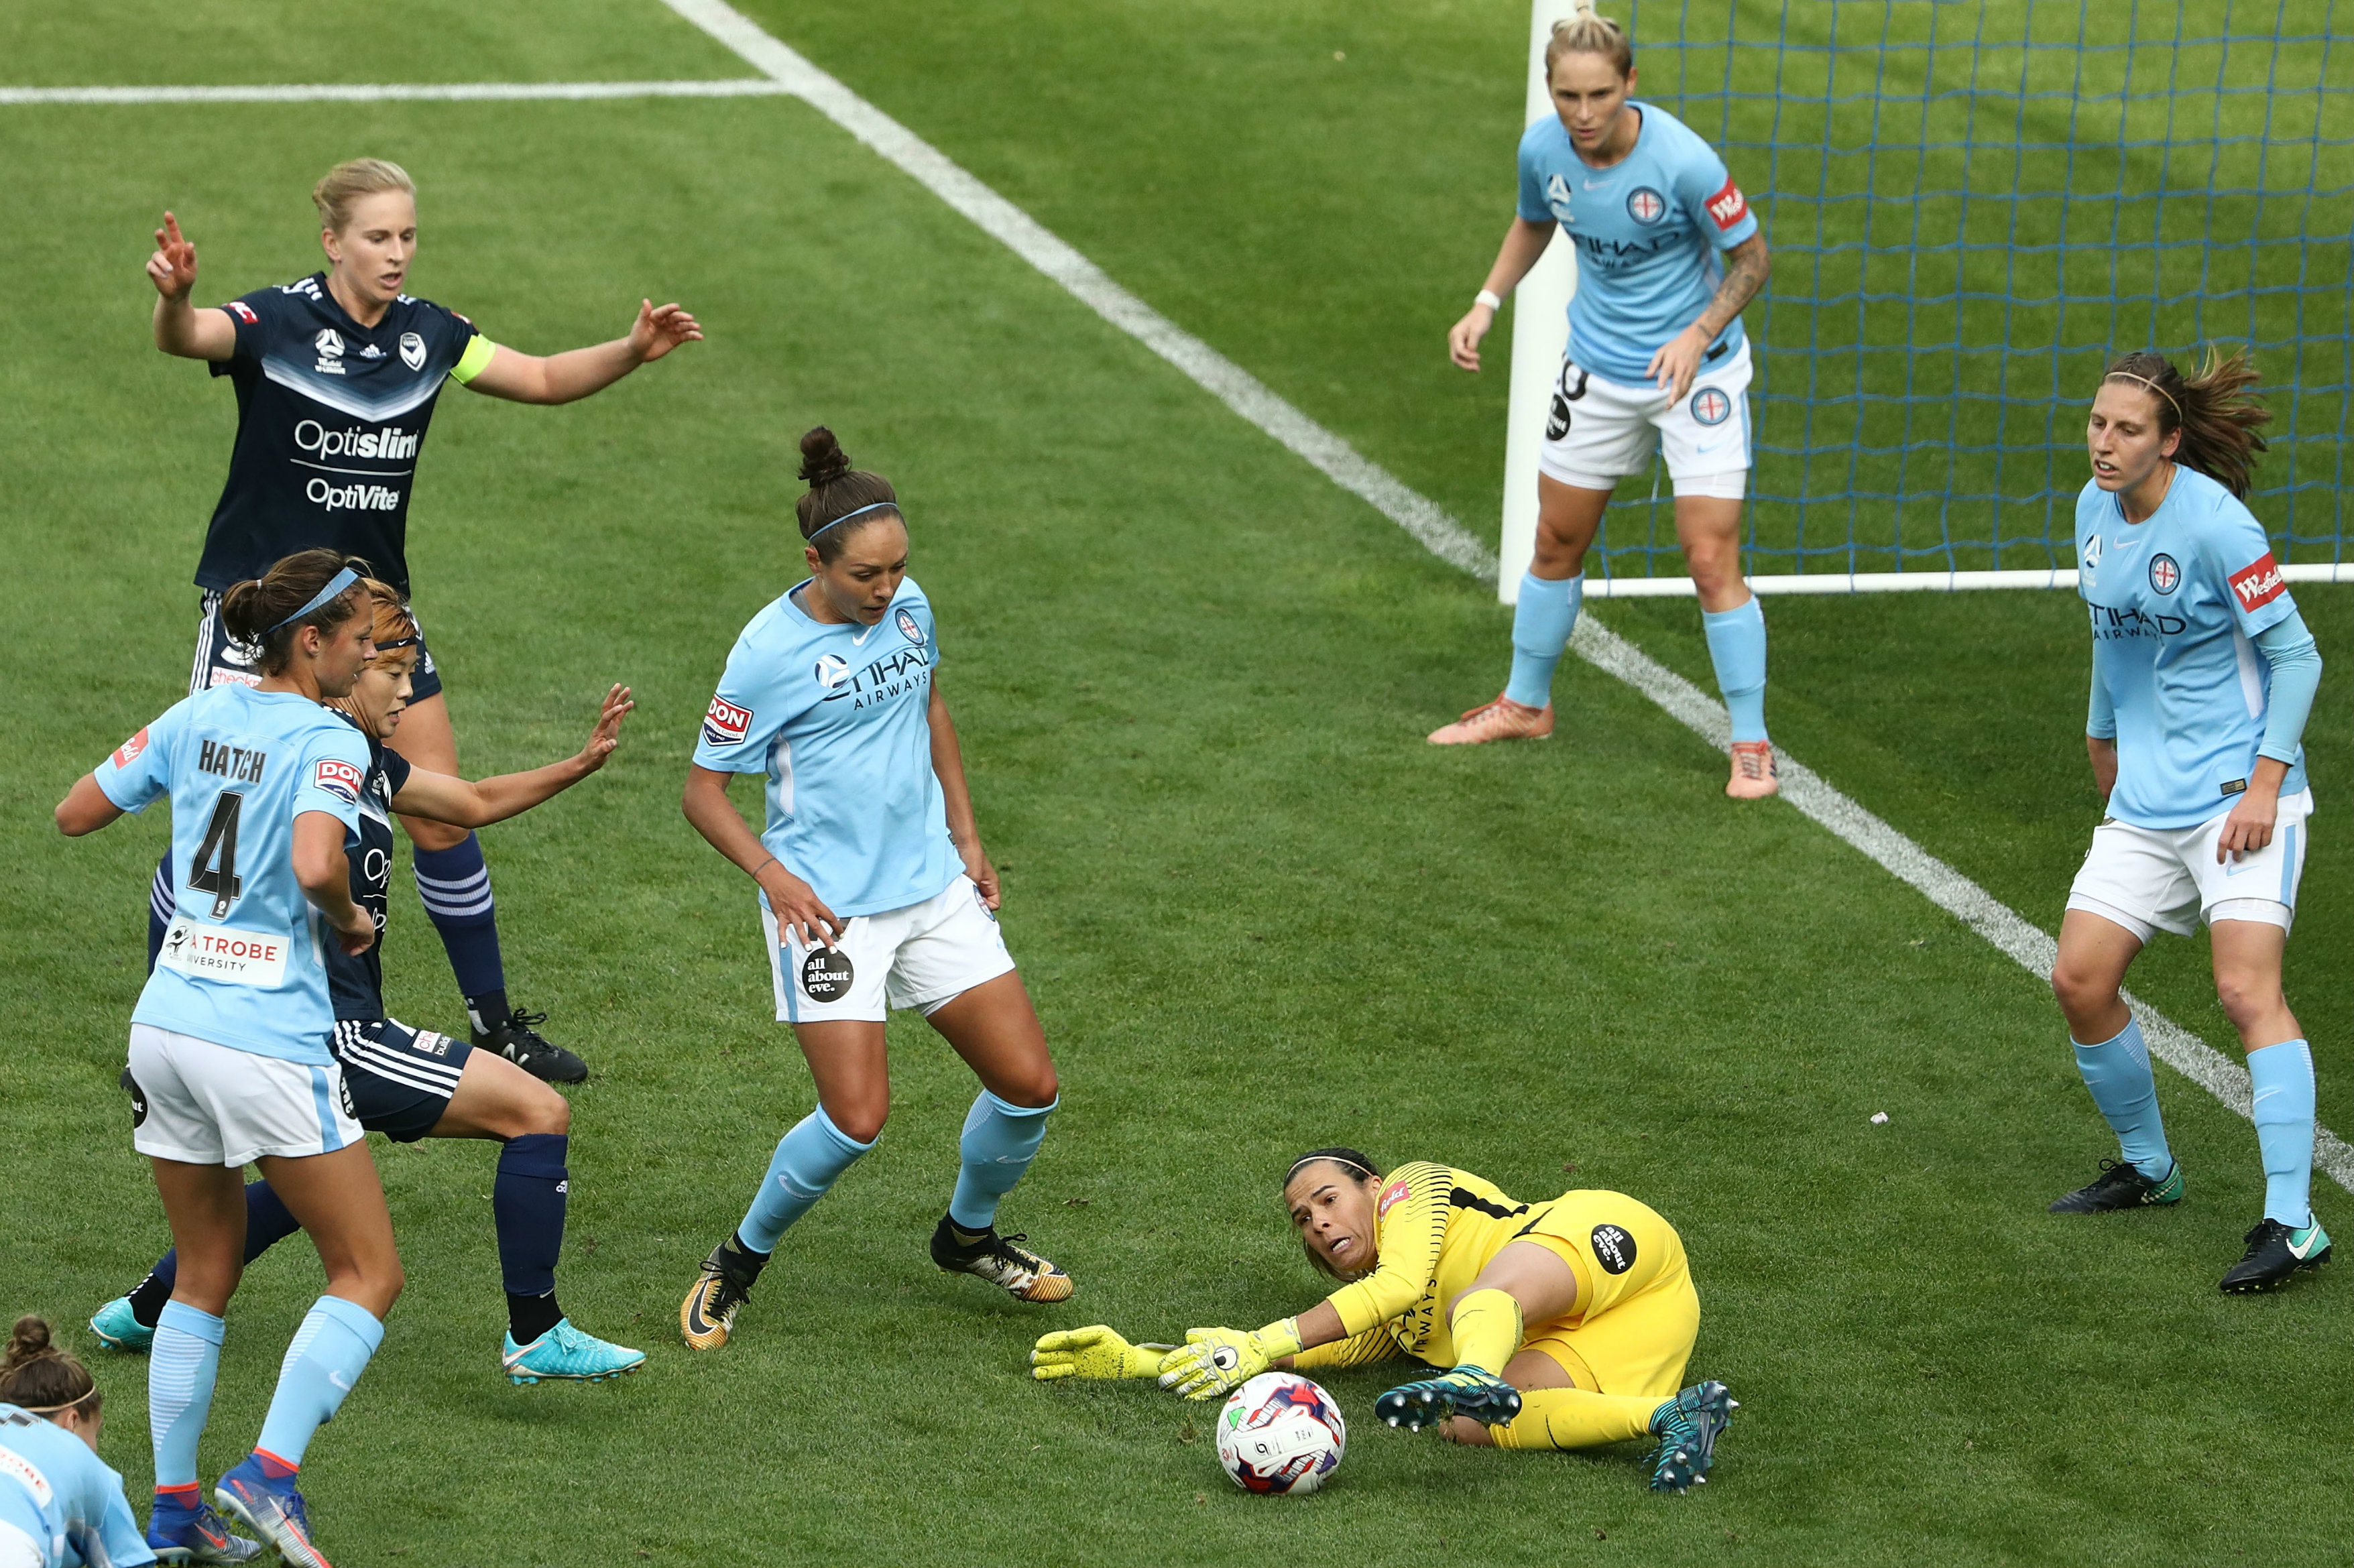 Lydia Williams makes a key save in the Melbourne Derby.